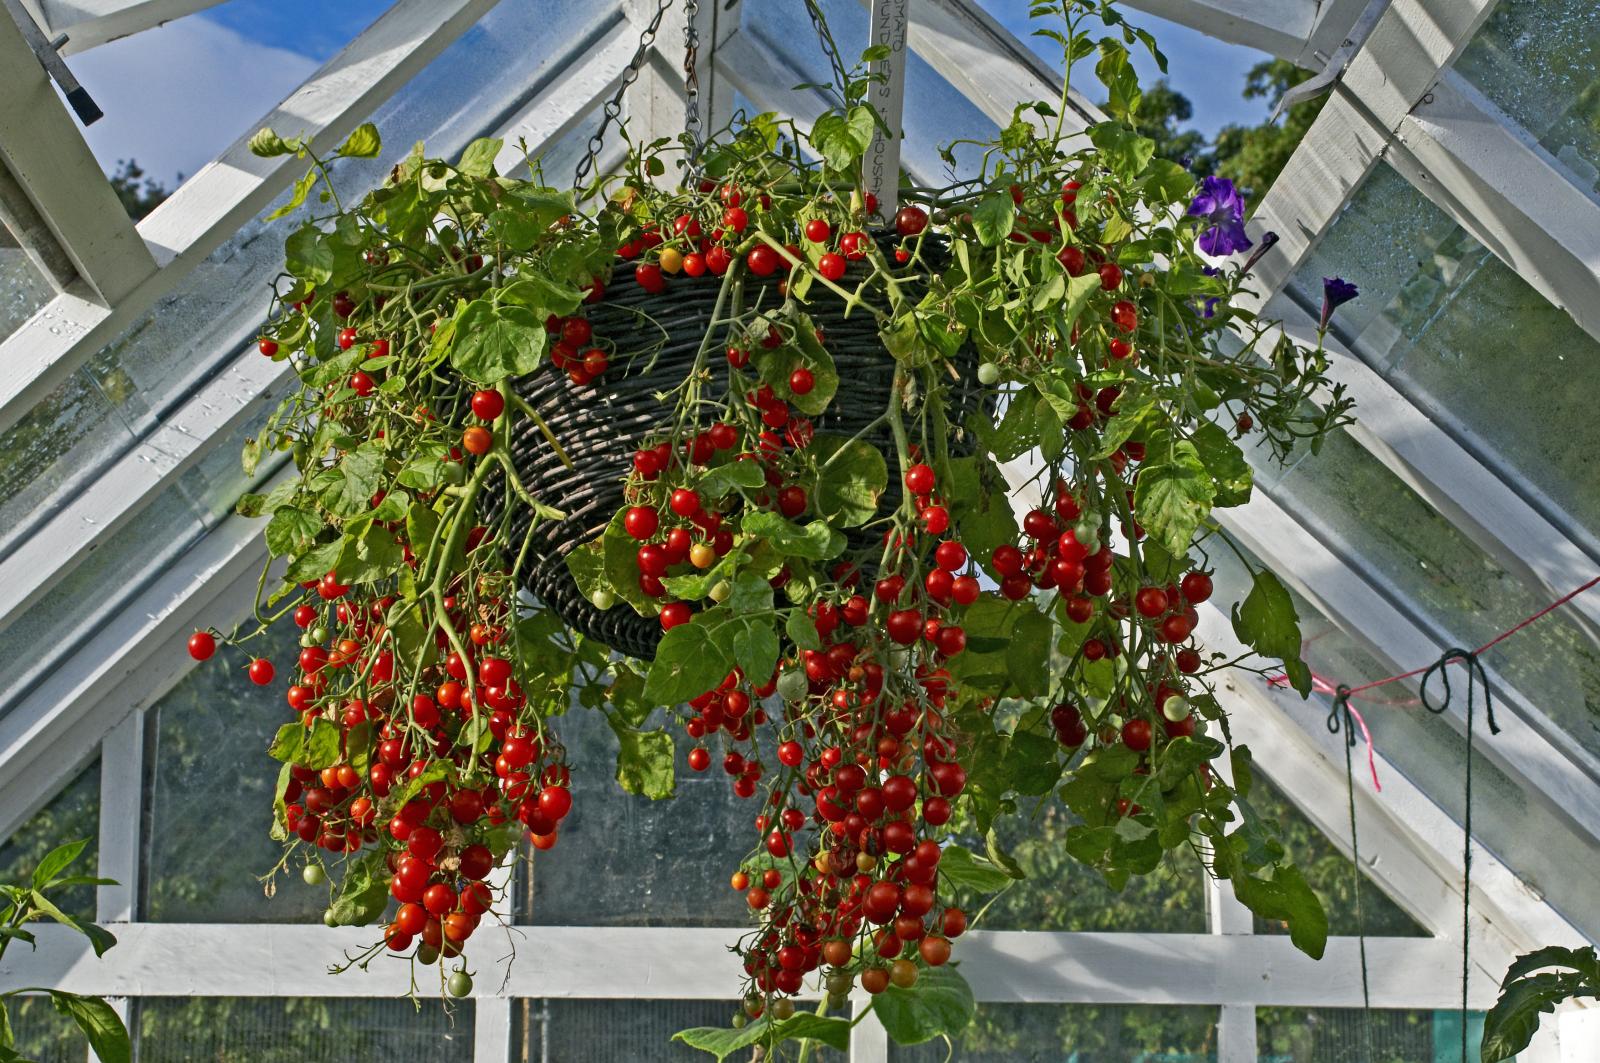 Tomatoes in a hanging basket